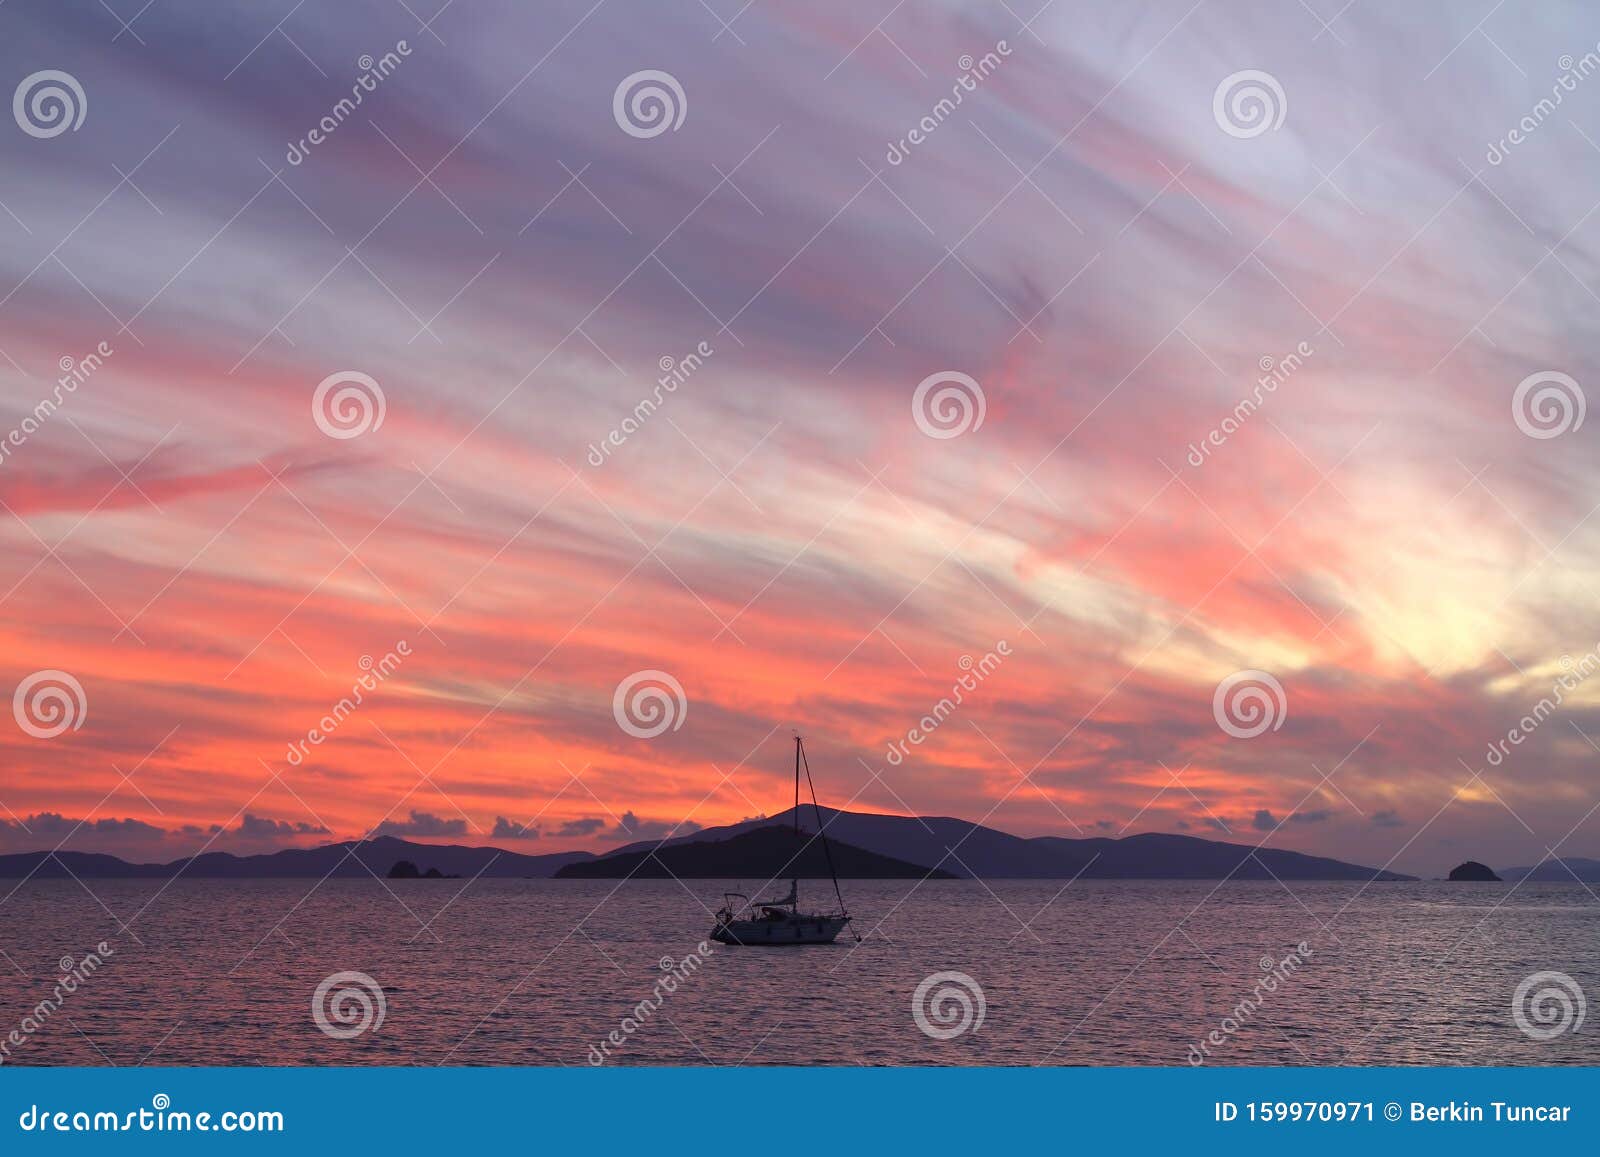 Seaside Town Of Turgutreis And Spectacular Sunsets Stock Image Image